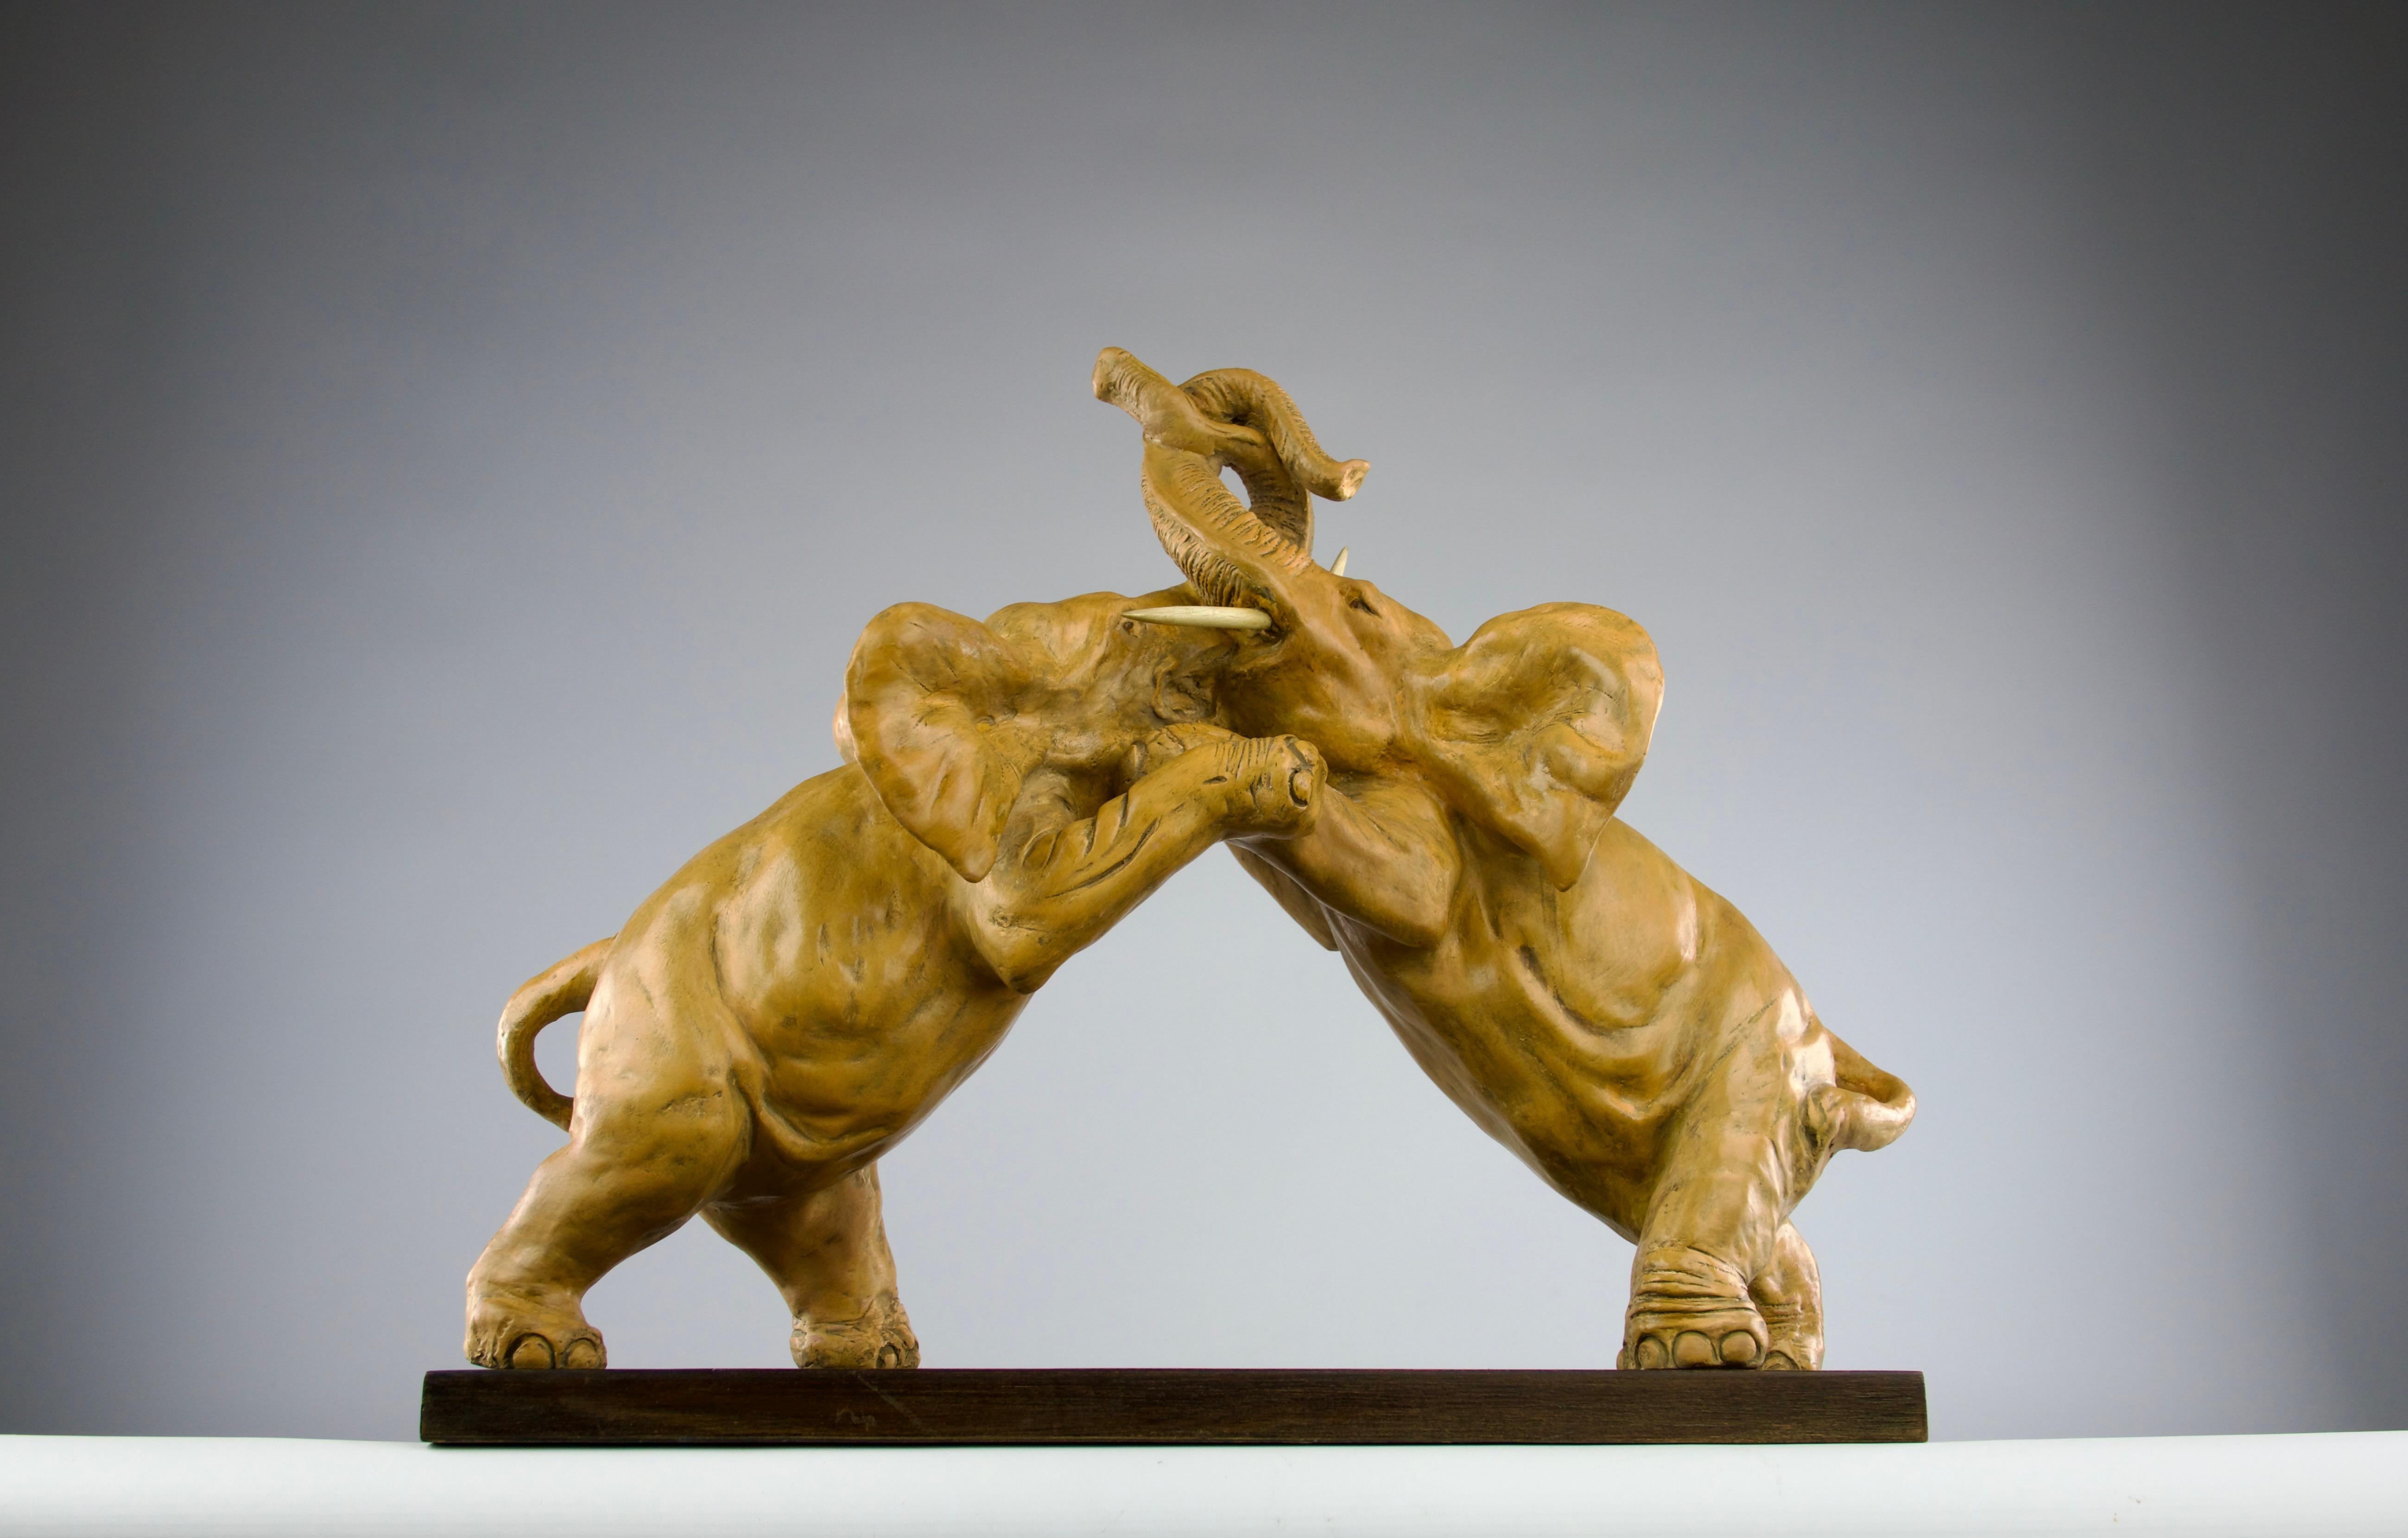 Superb patinated earthenware sculpture representing two elephants fighting, France 1800s, Romantic period. Beautiful details enhancing the vivacity of the piece with slight hues of red simulating blood from the fight. Tusks made of painted wood.

In